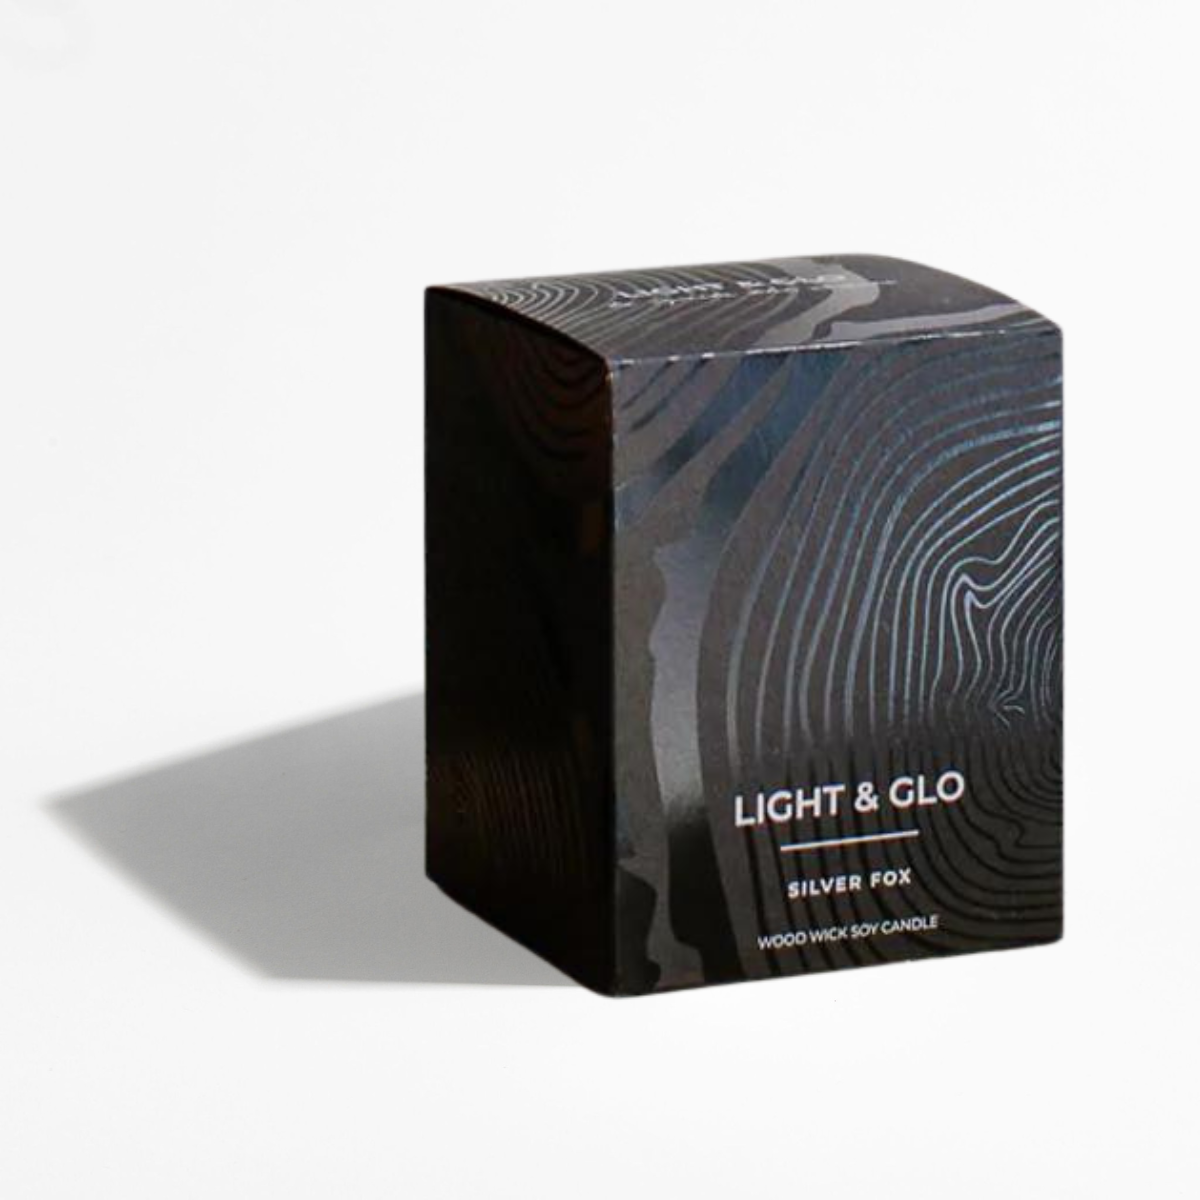 Silver Fox - Noir Large Candle | Luxury Candles & Home Fragrances by Light + Glo